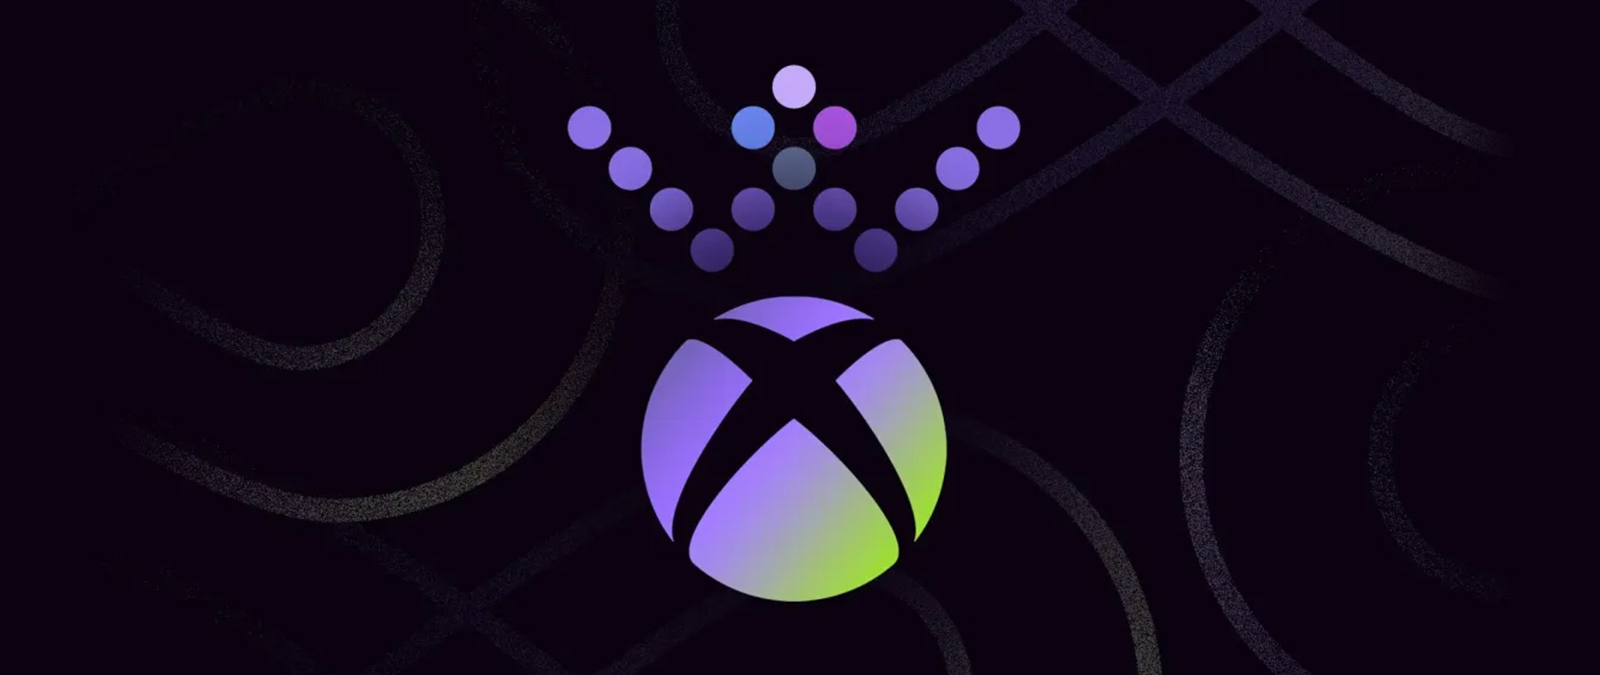 the header image of xbox celebrates international women’s day in support of women in gaming